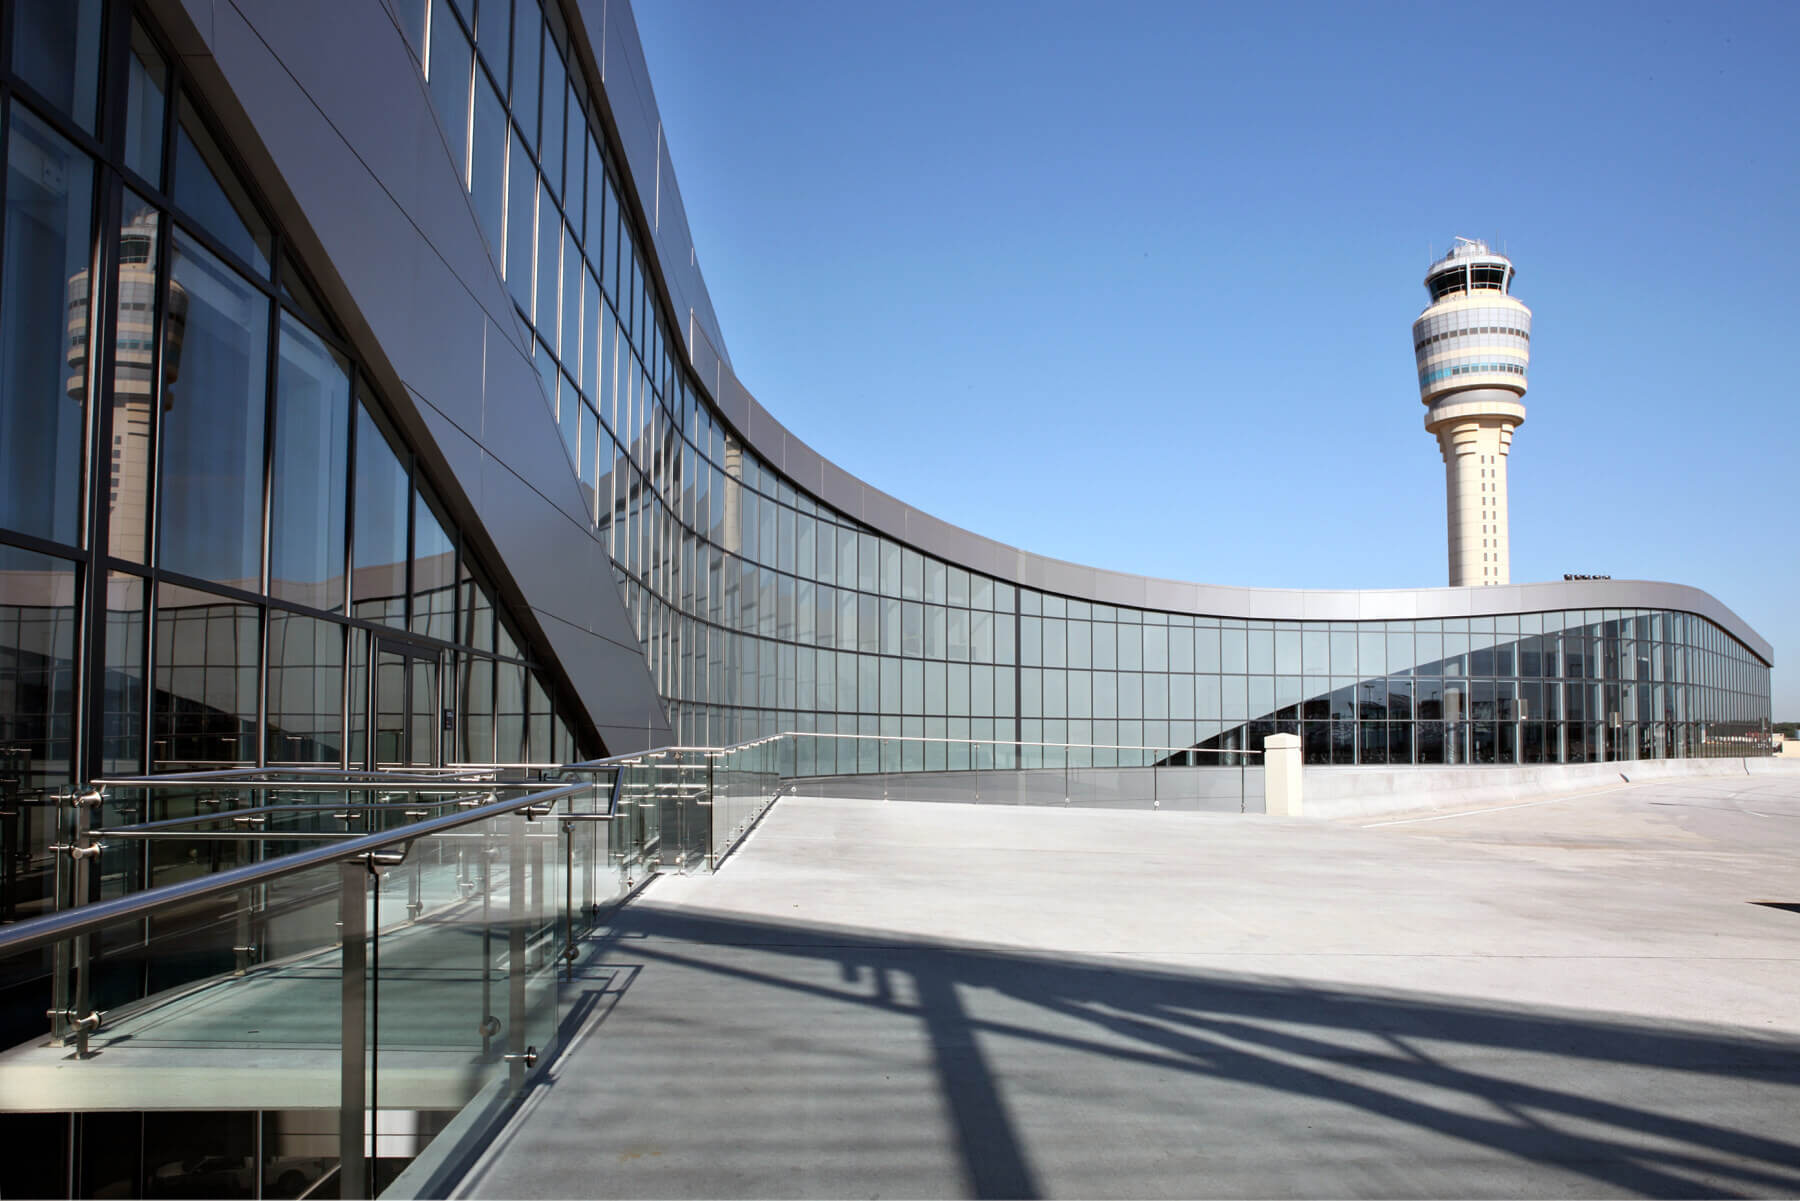 the façade of the international terminal at Hartsfield-Jackson Atlanta International Airport with the air traffic control tower in the distance